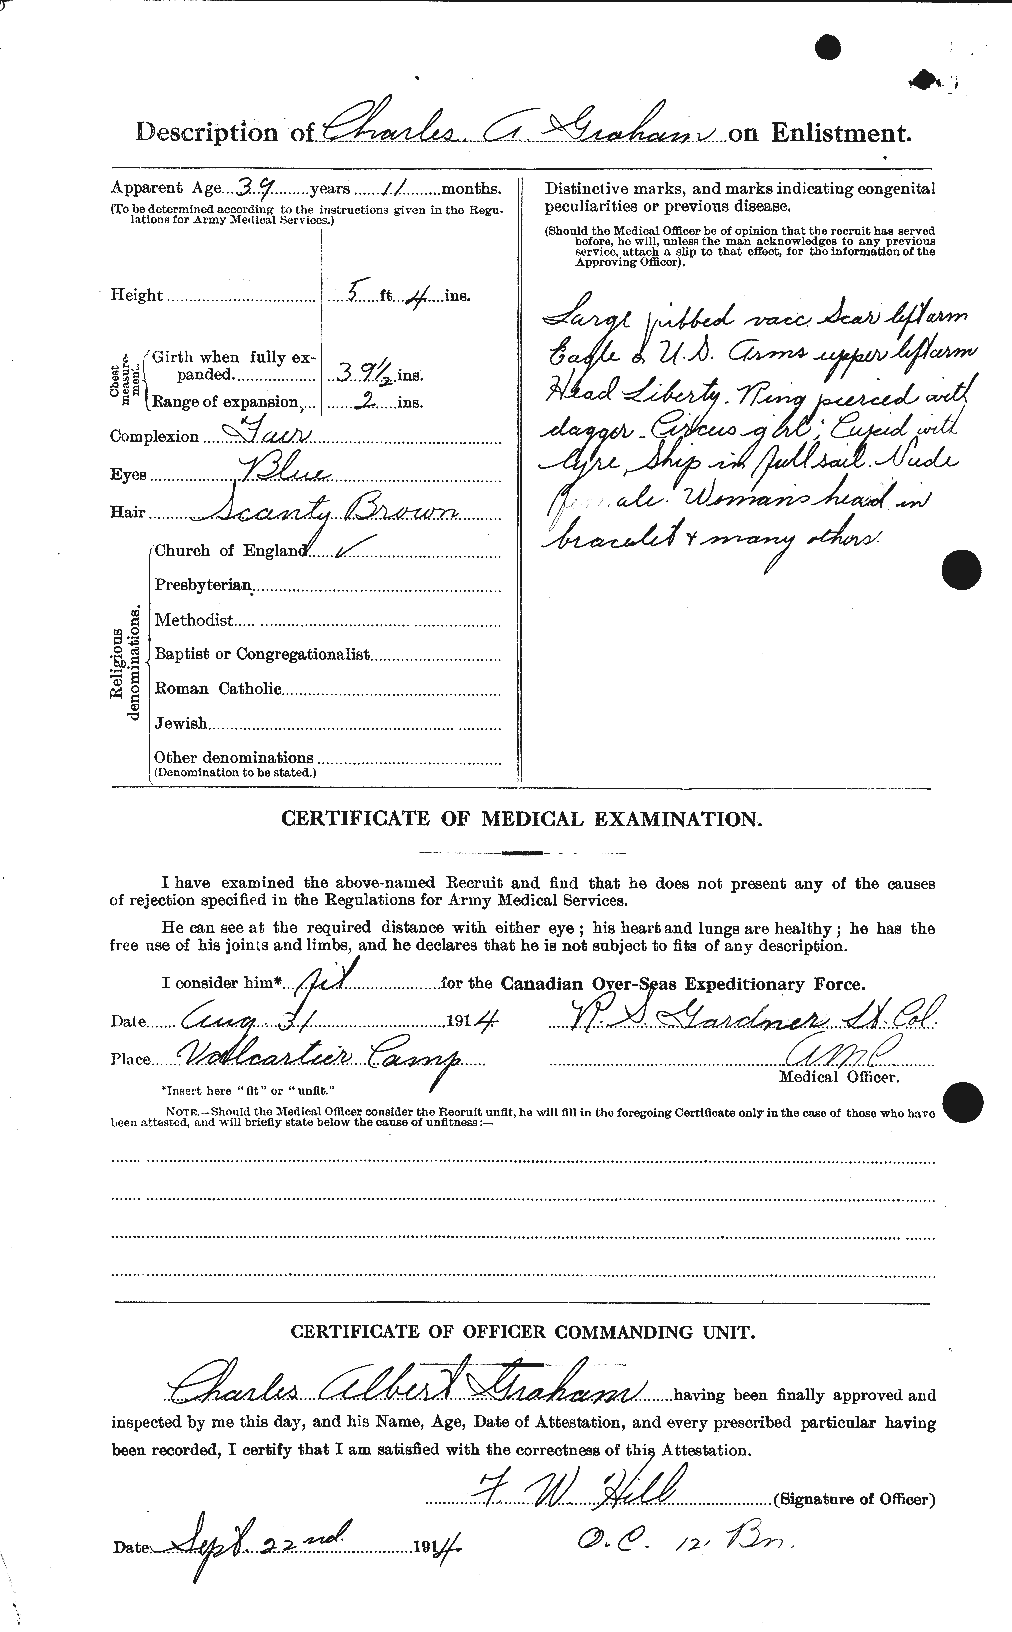 Personnel Records of the First World War - CEF 359704b